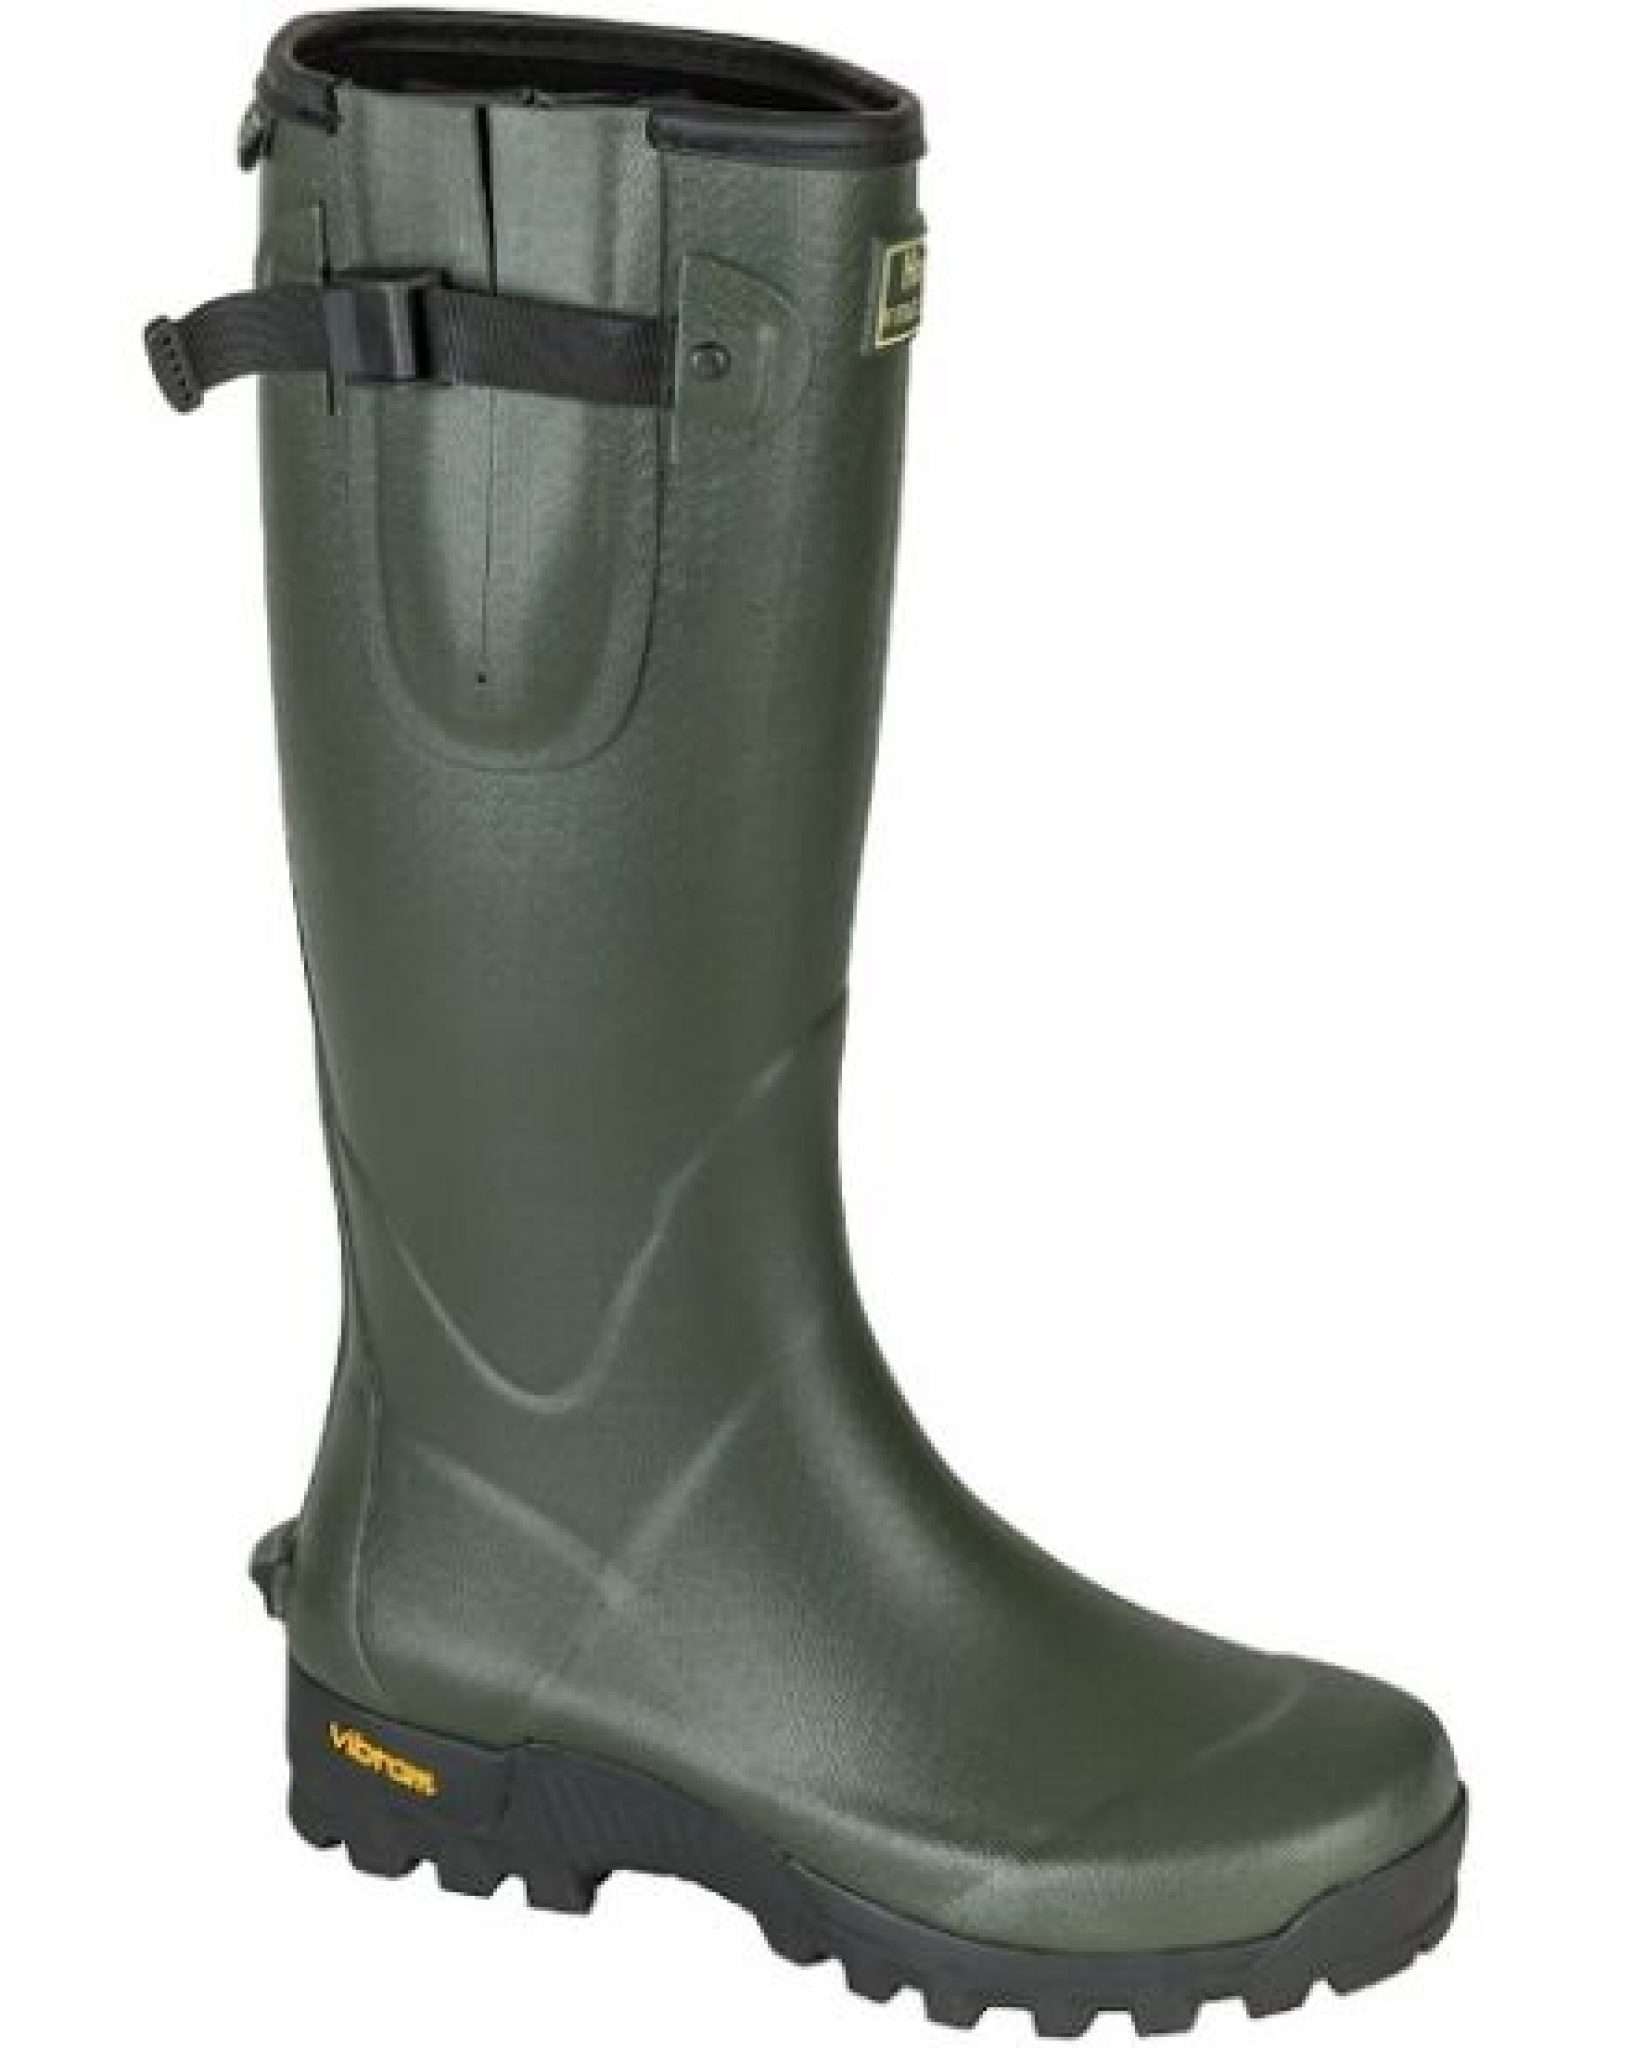 Best Wellington Boots for Walking - Our Top Hiking Welly Choices